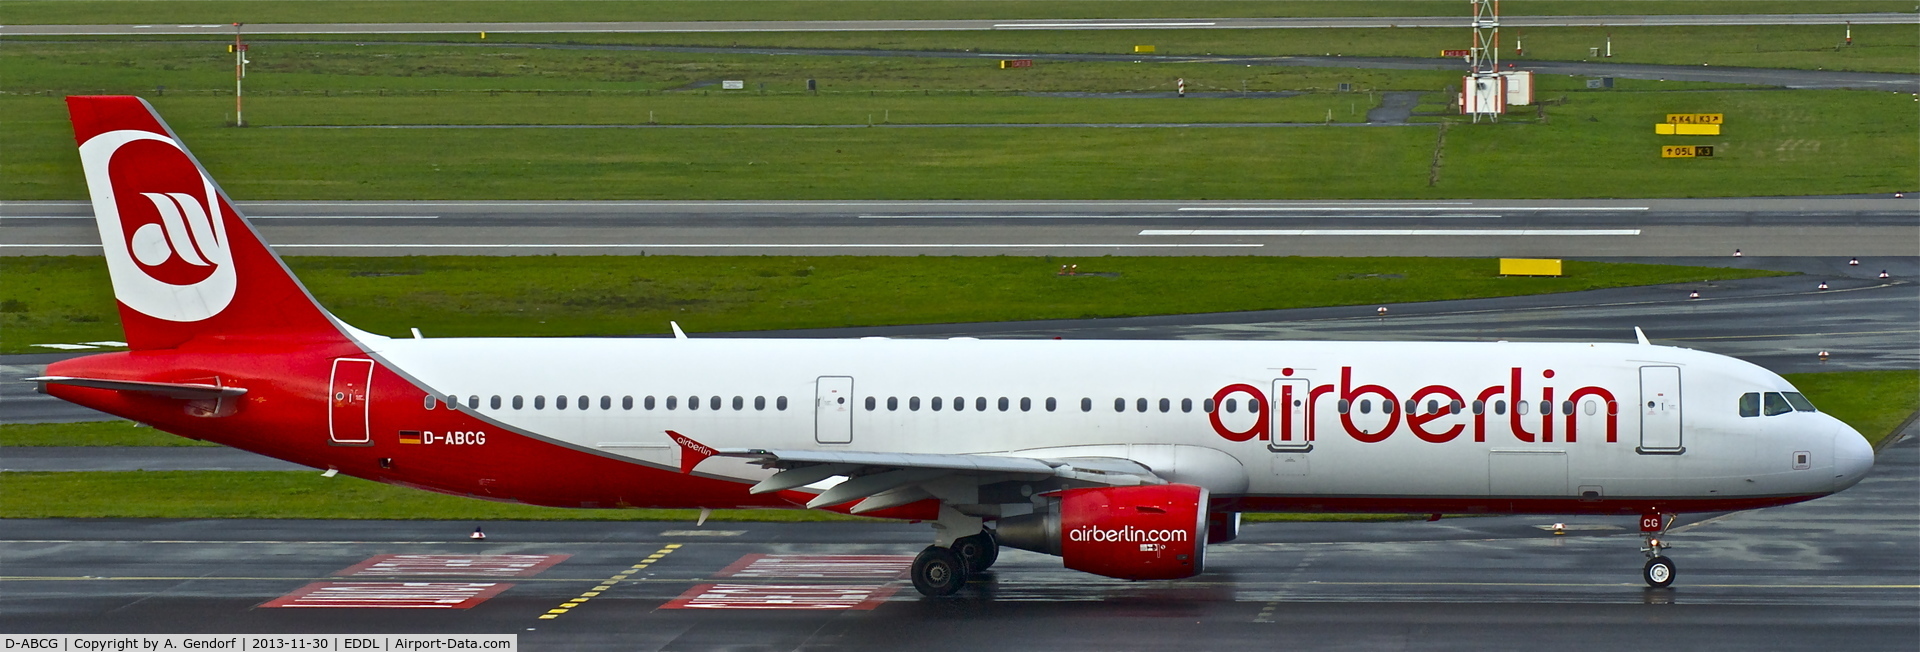 D-ABCG, 2003 Airbus A321-211 C/N 1988, Air Berlin, is here on taxiway 